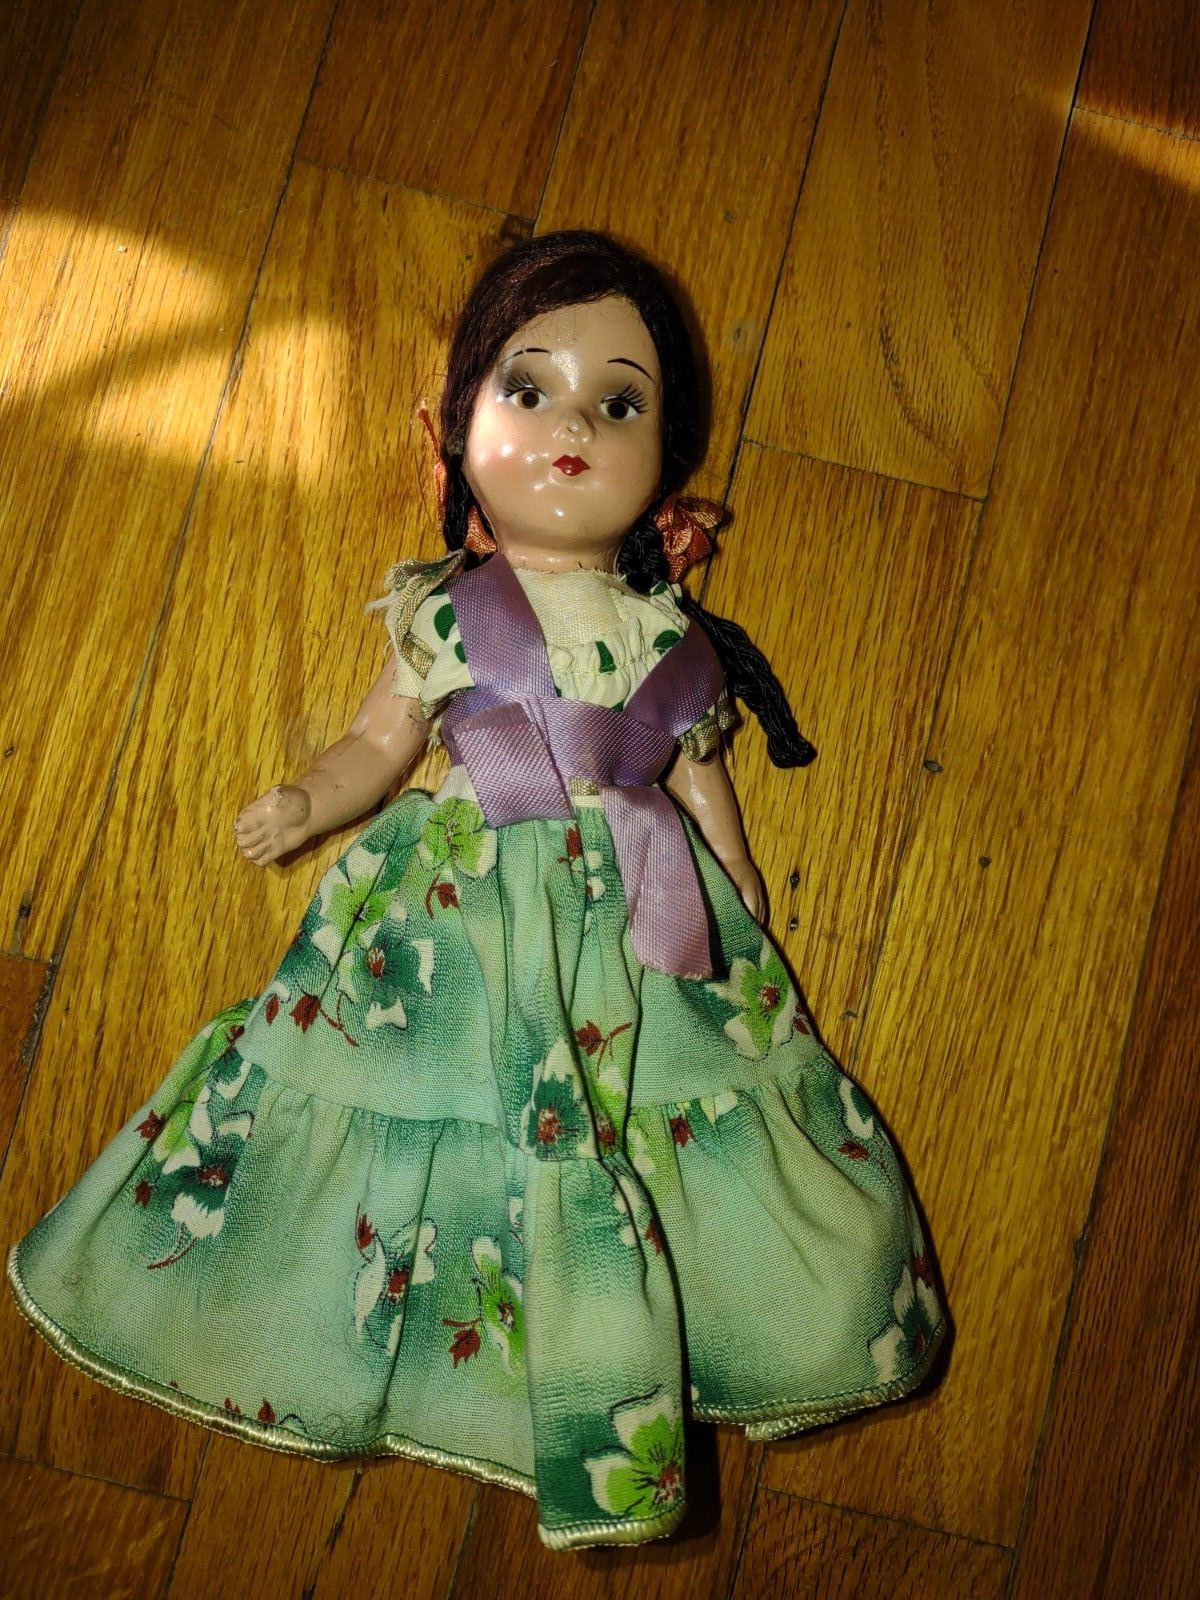 Vintage 1962 Mexican Souvenir Doll - Featured in the John F Kennedy Library